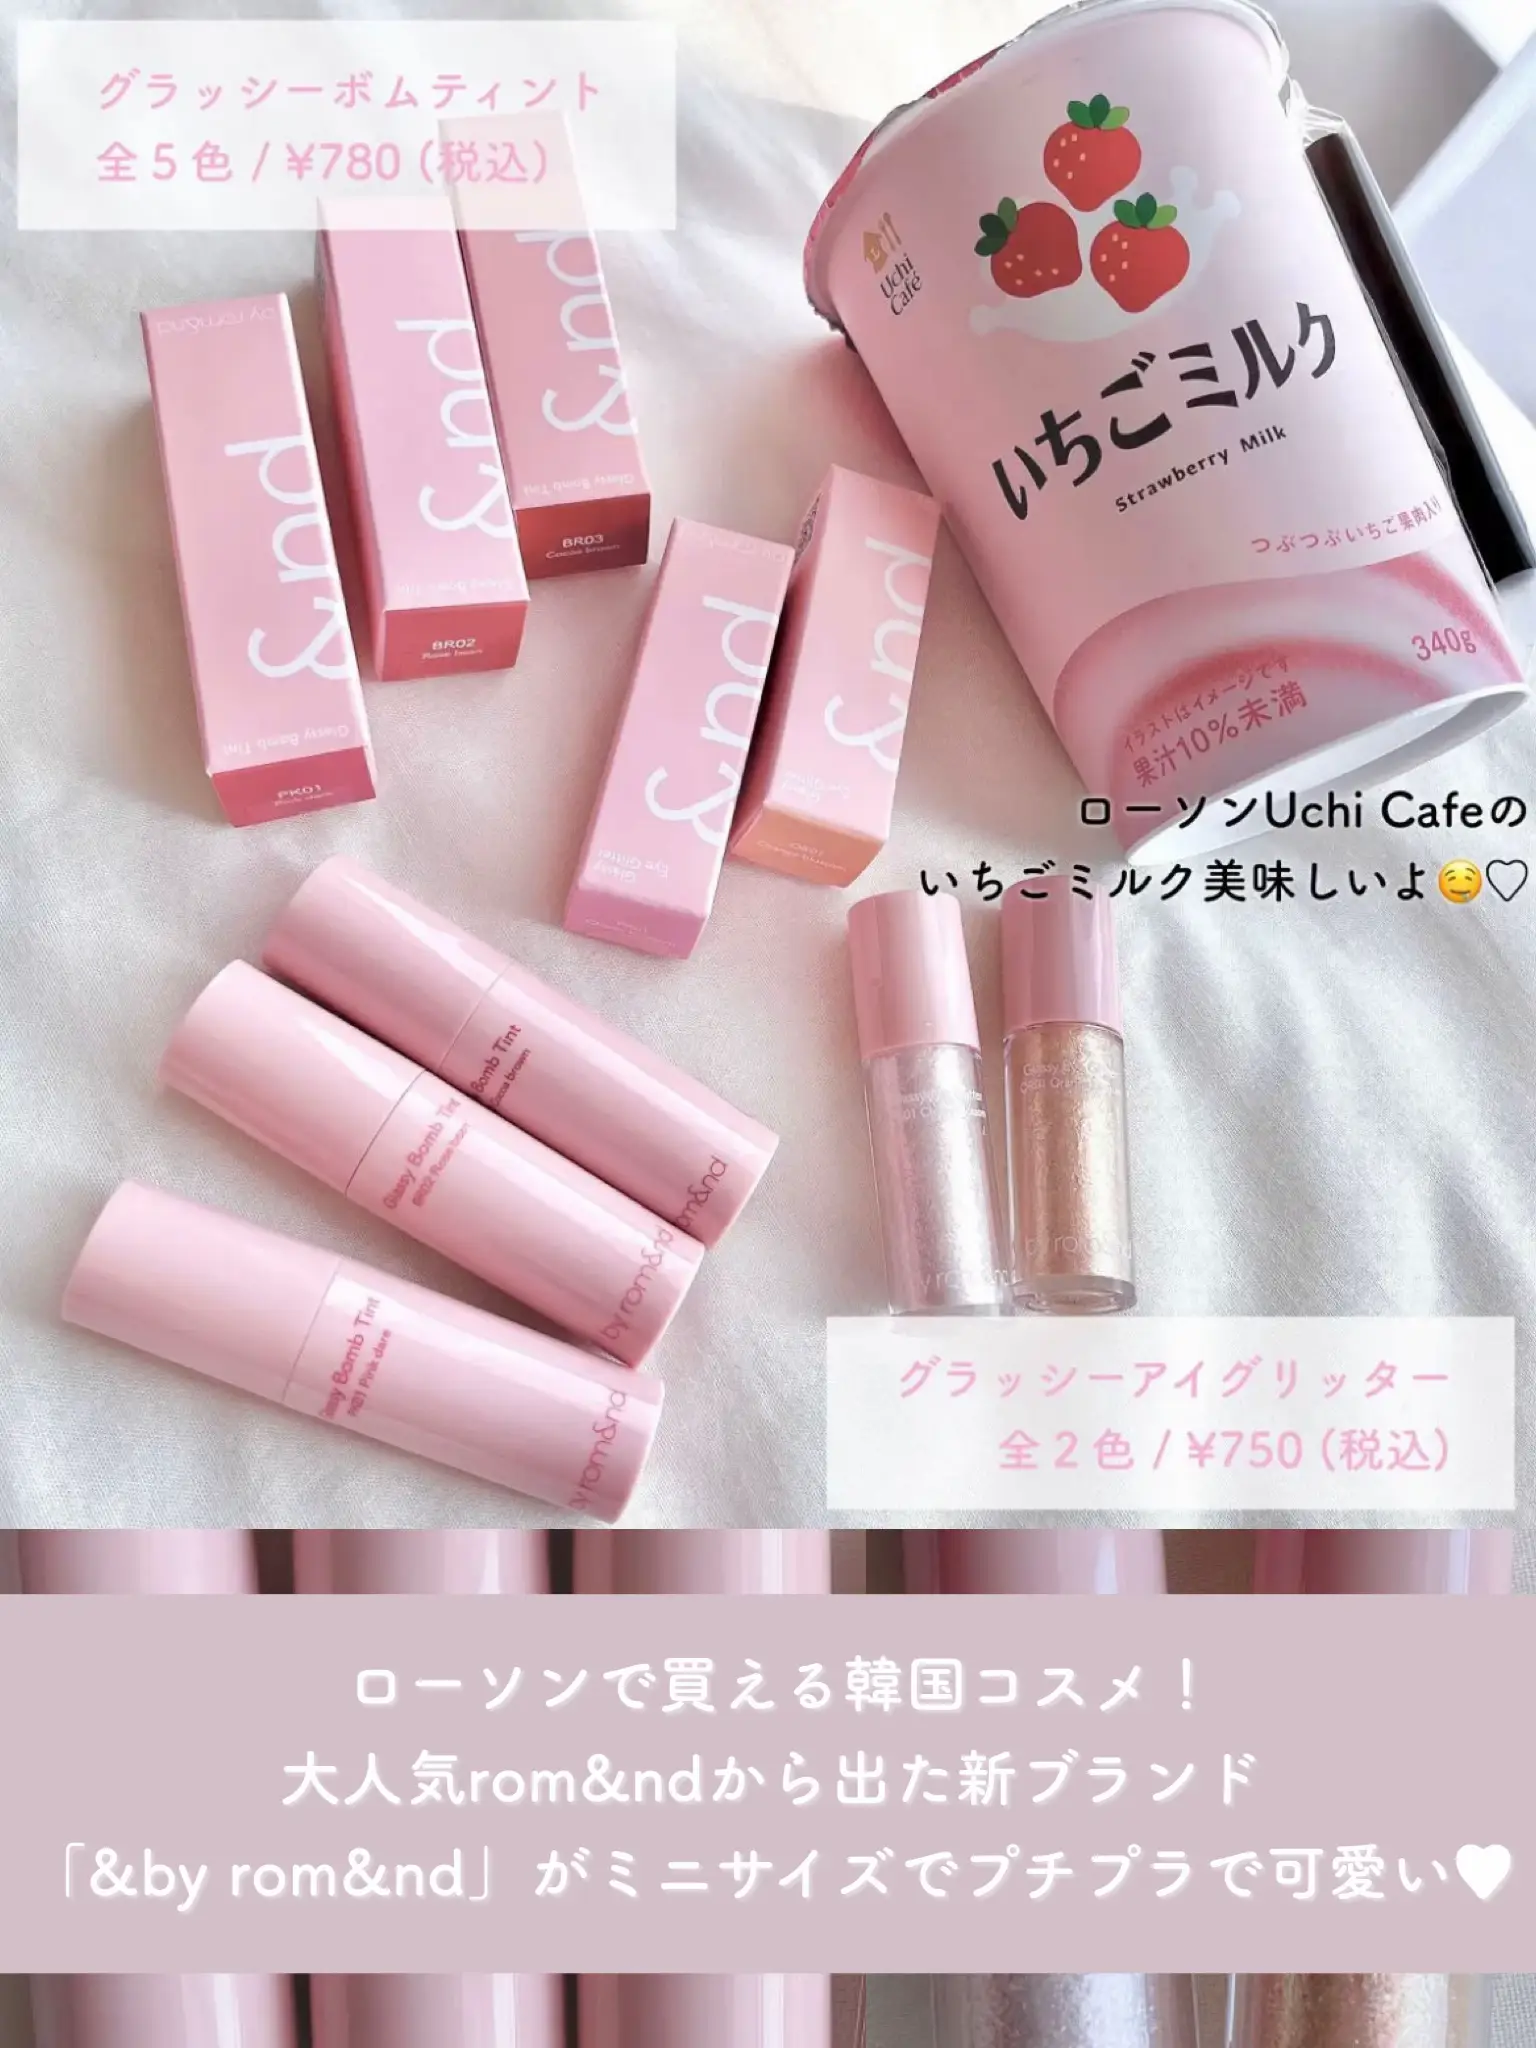 Rom&nd to launch Lawson-exclusive brand to capture Japan's makeup rebound